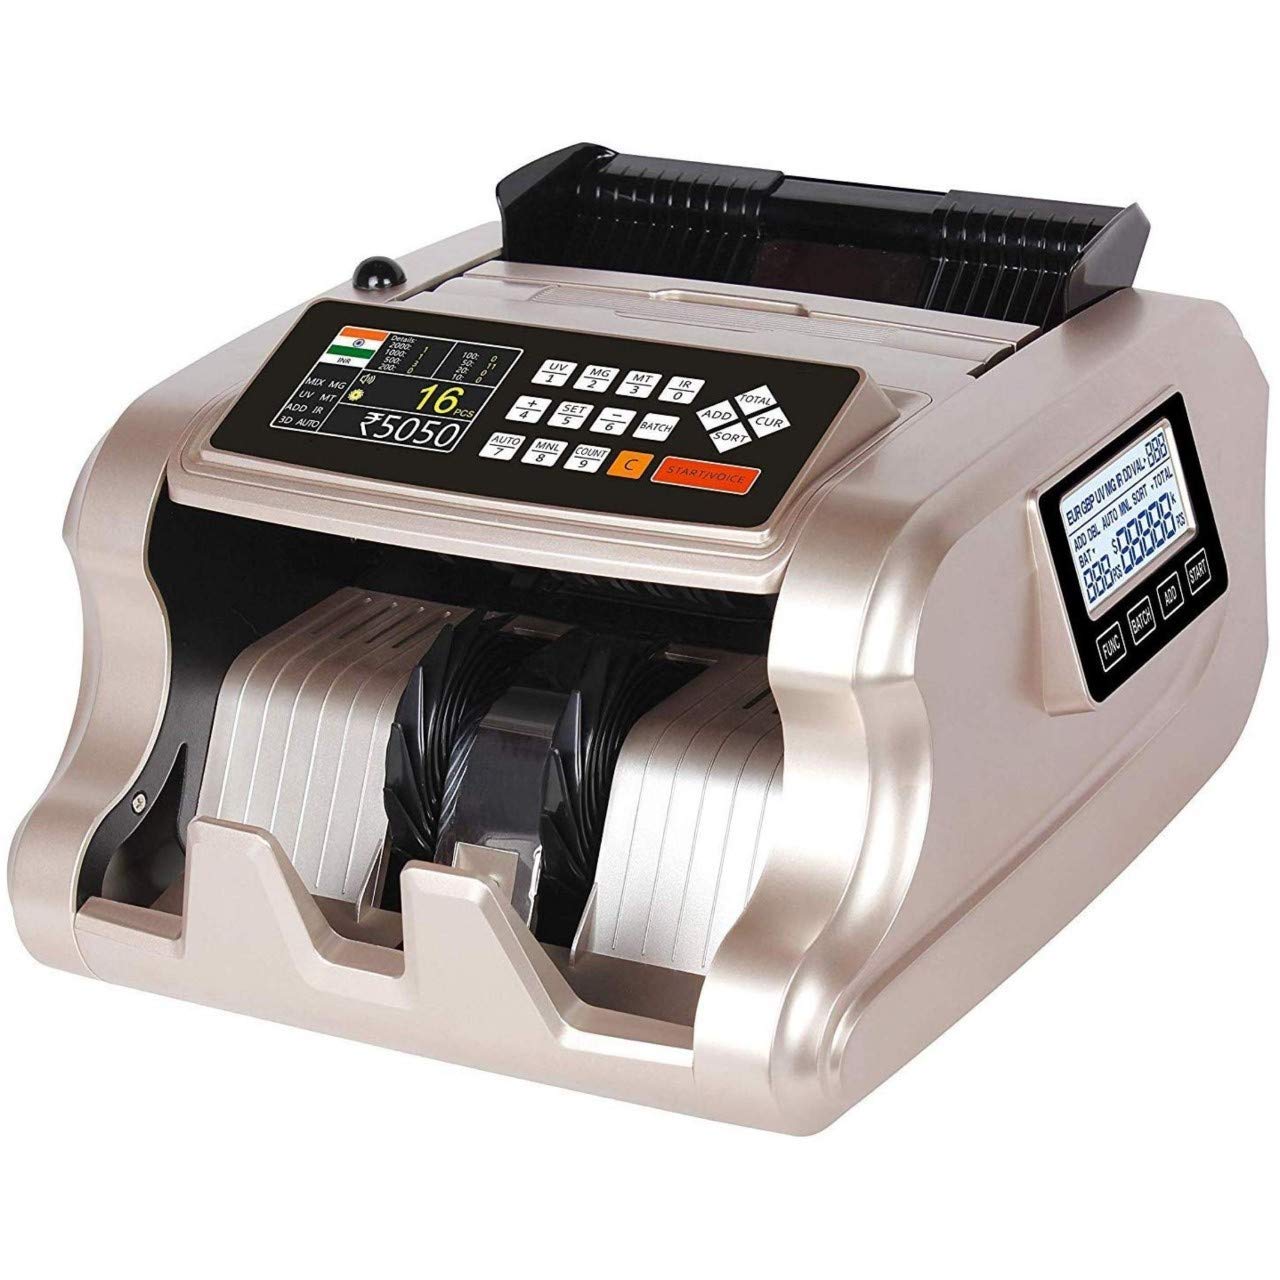 JD9 Exclusive Series Mix Note Value Counting Machine/Currency Counting Machine with Fake Note Detection, Super High Speed & High Capacity, with LED Display, Large LCD Screen (1200pcs / min)